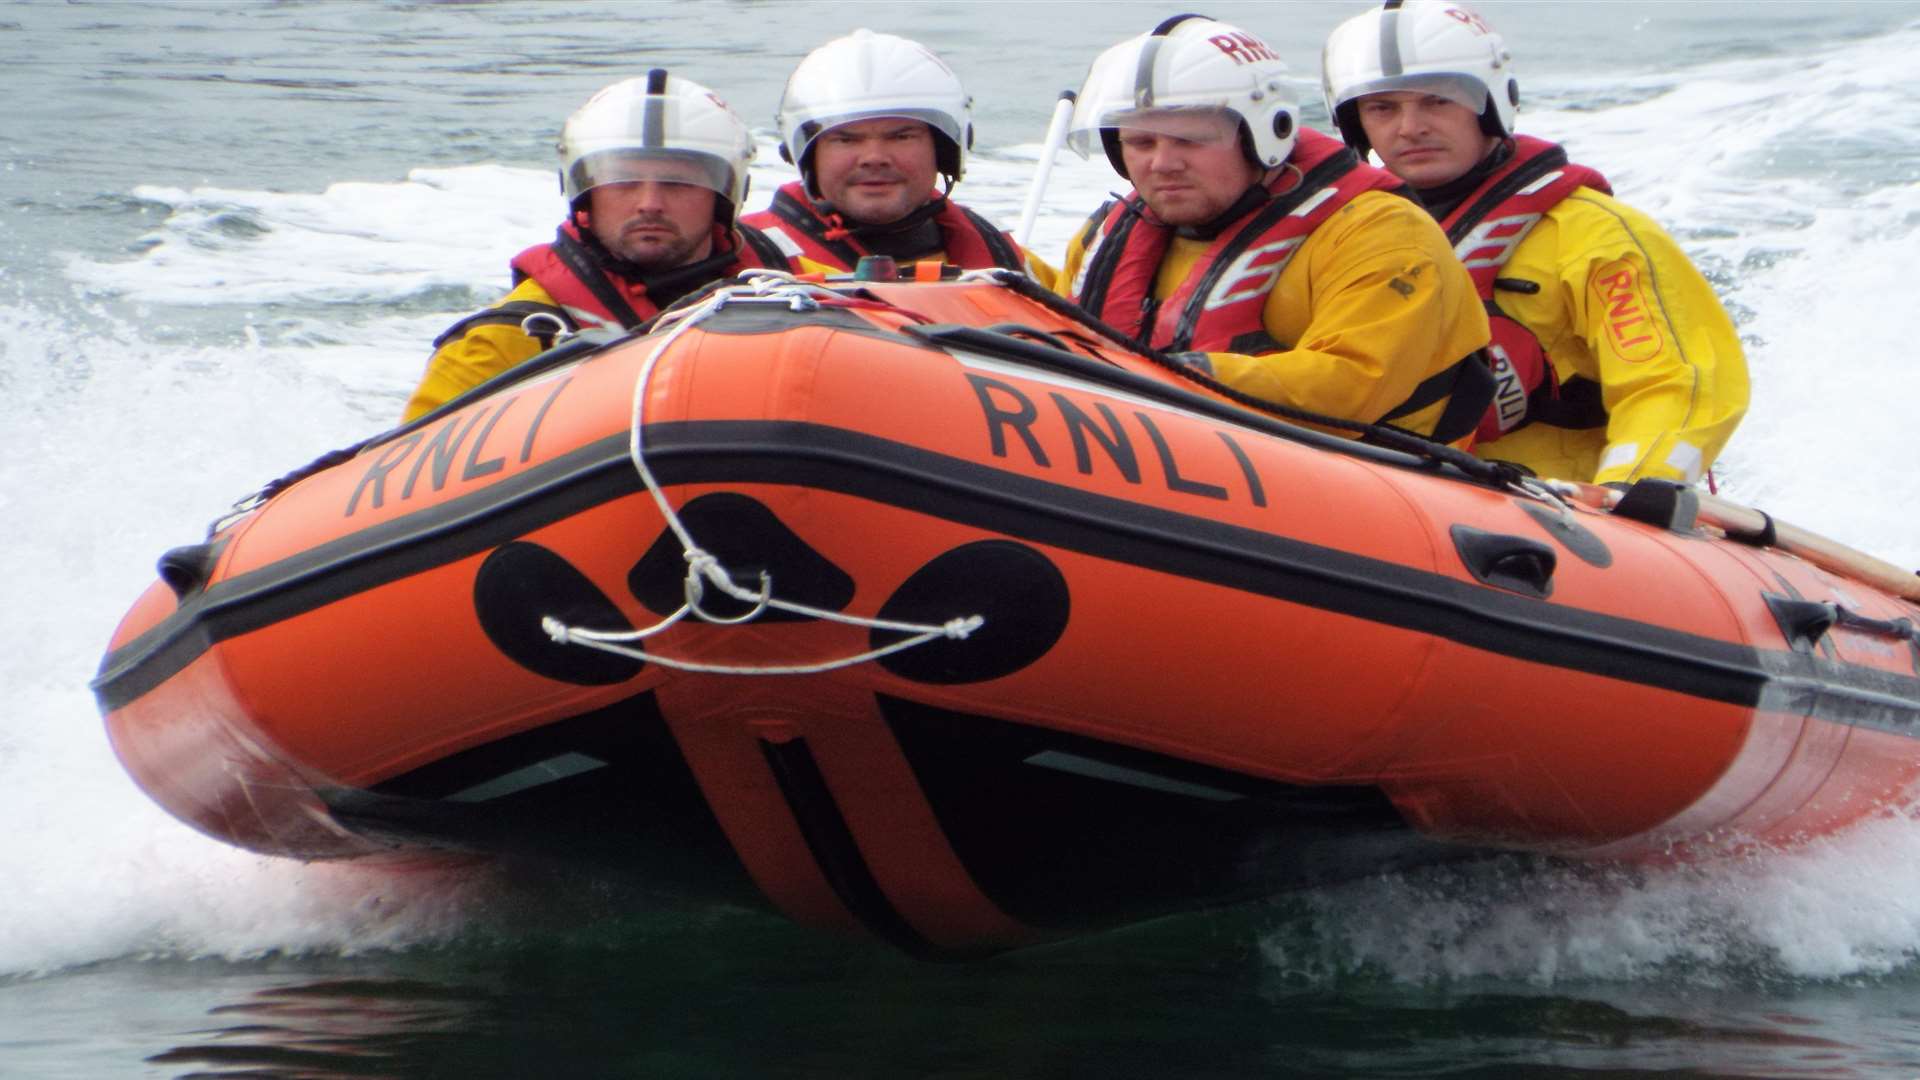 Sheerness Inshore Lifeboat in action. Photo: RNLI